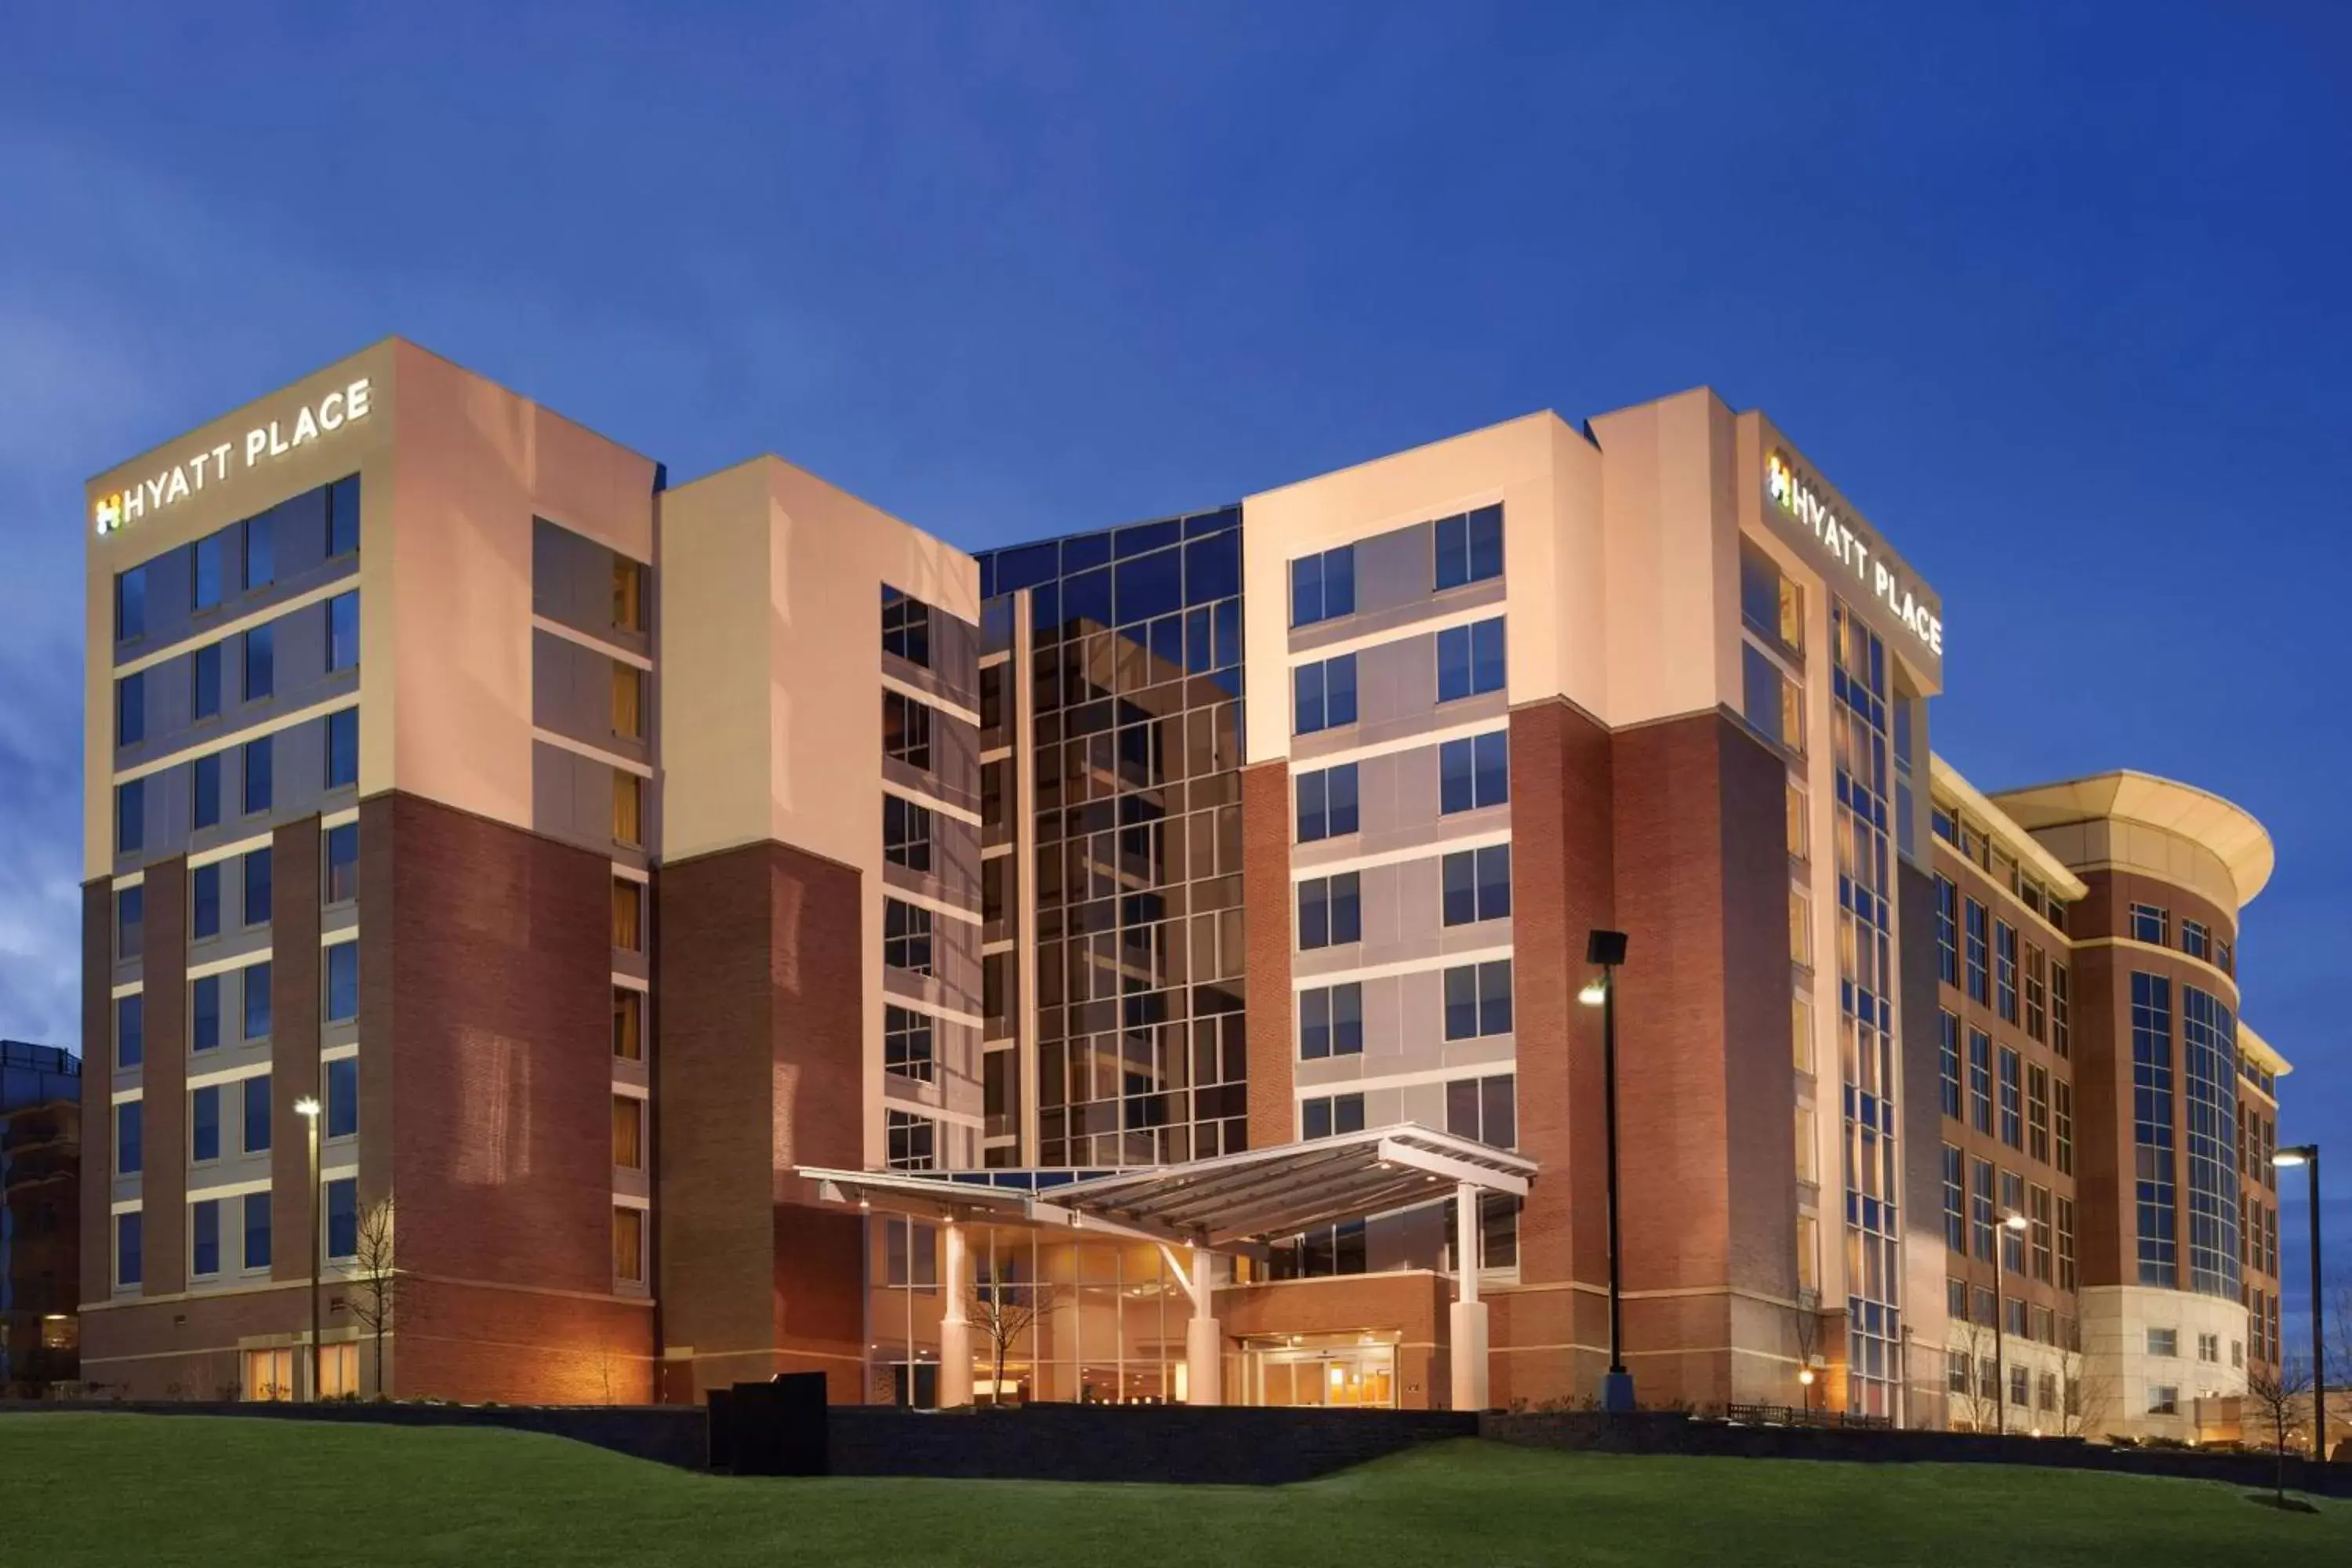 Property Building in Hyatt Place St. Louis/Chesterfield